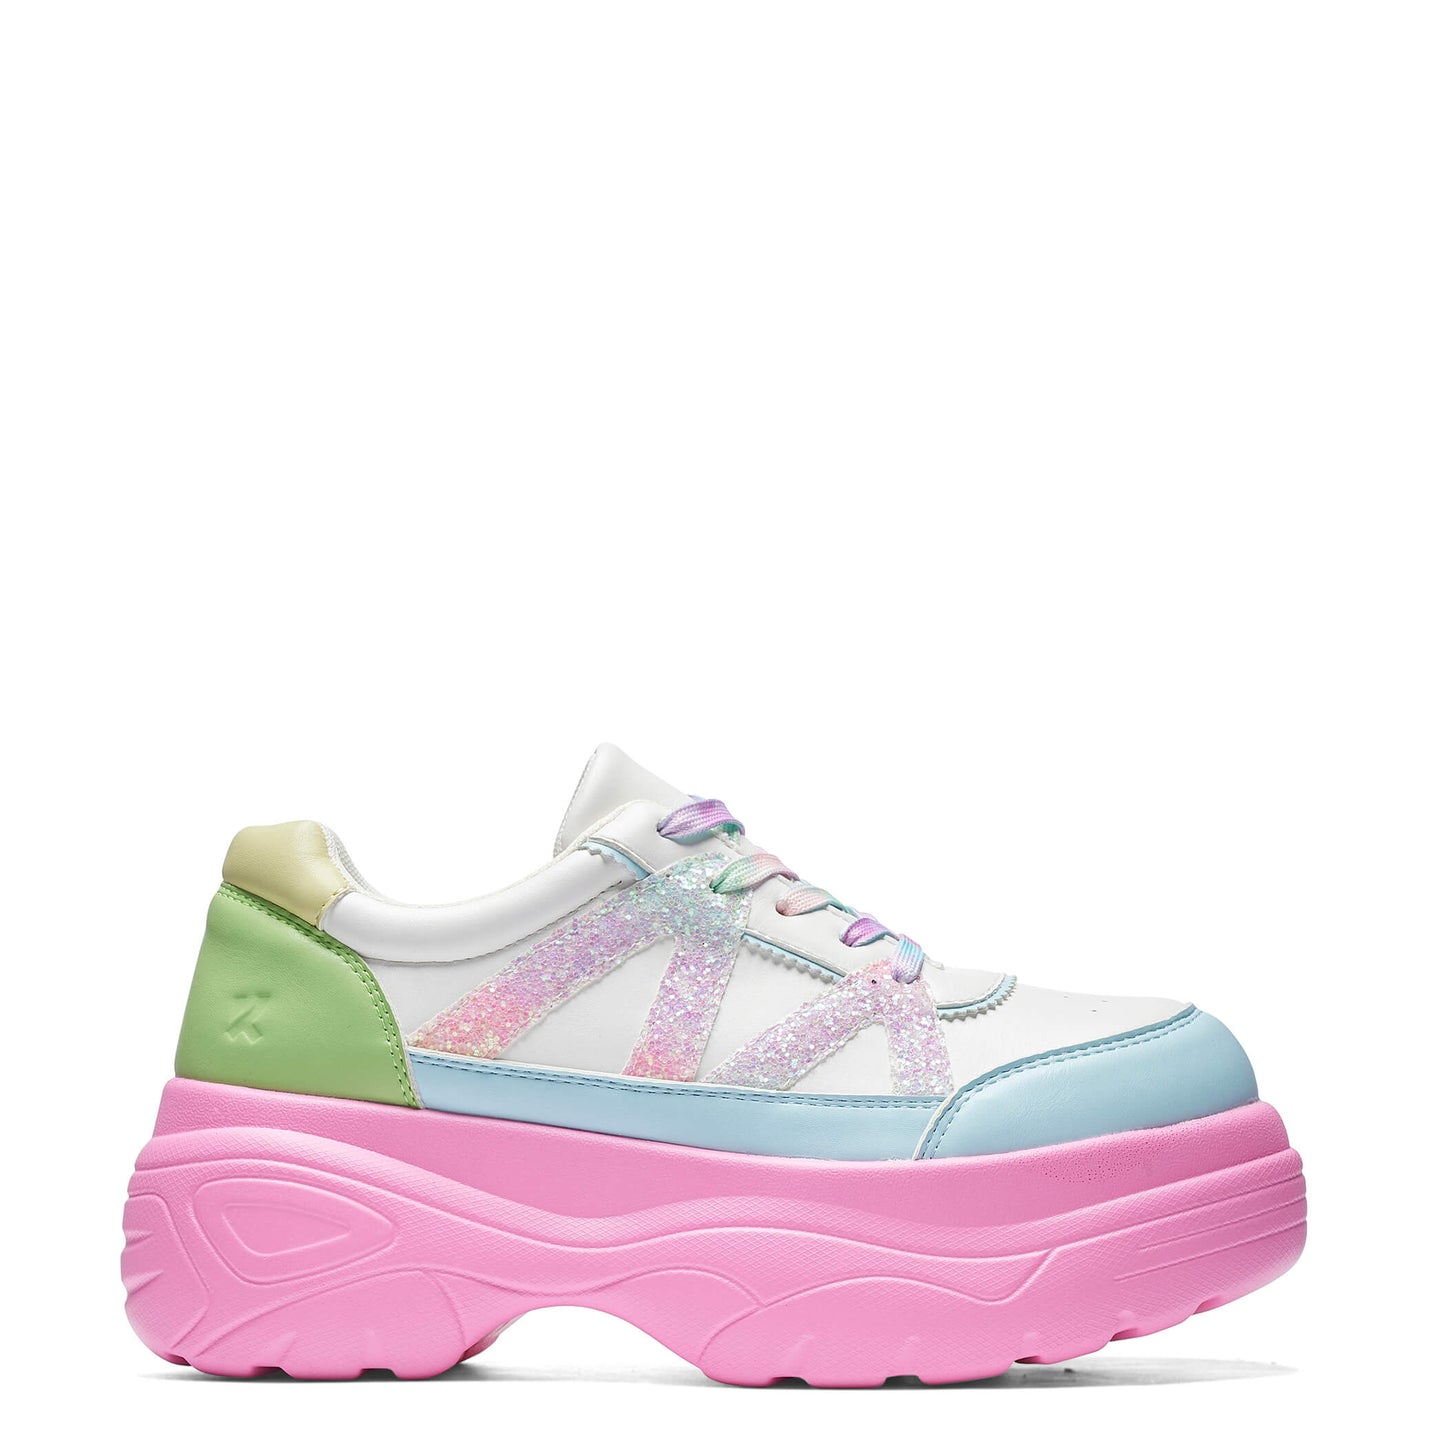 Gummy Glow Worm Chunky Trainers - Multi - KOI Footwear - Front View